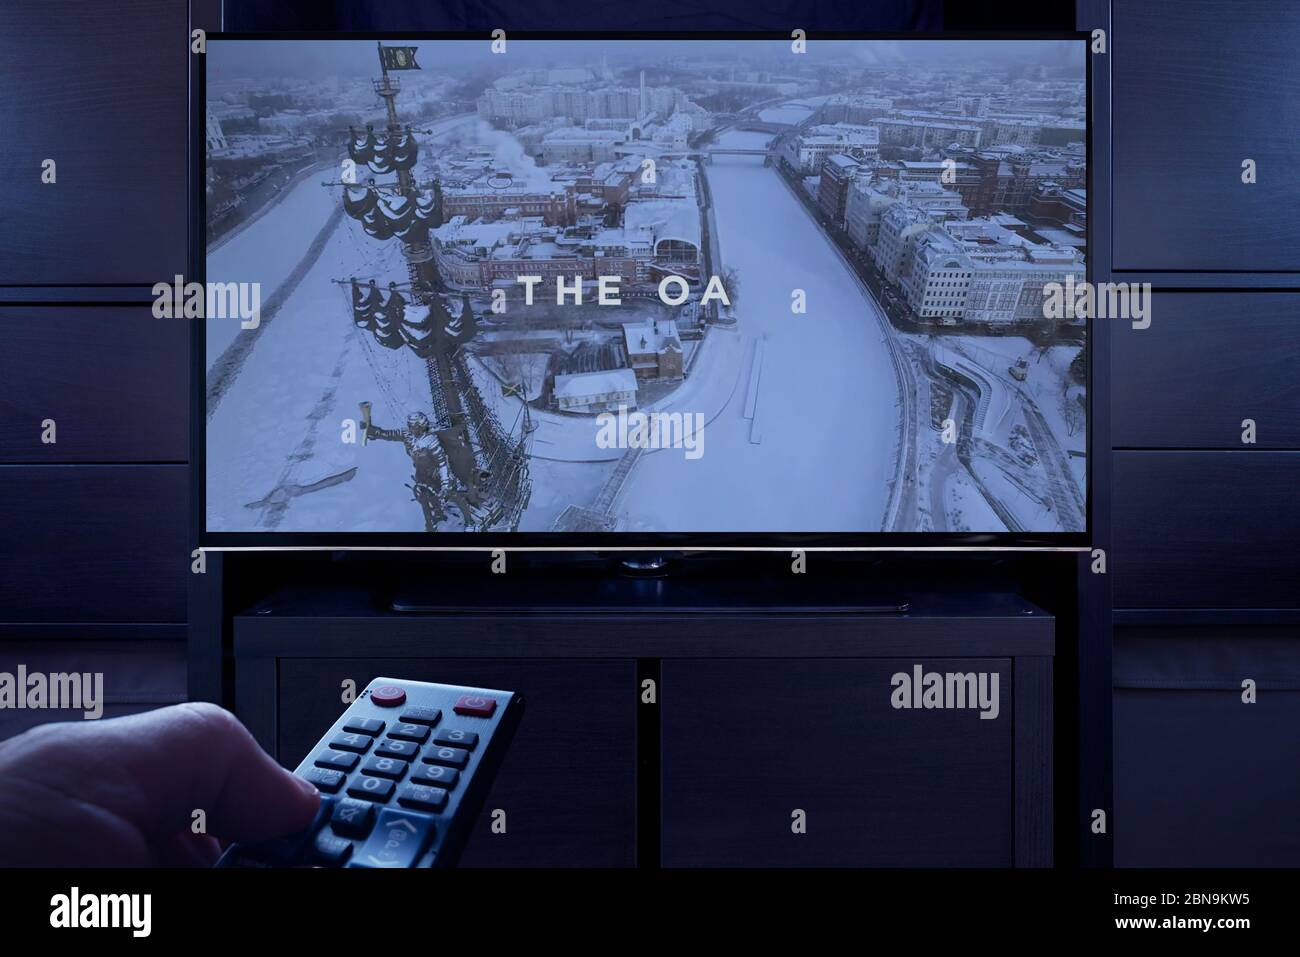 A man points a TV remote at the television which displays the The OA main title screen (Editorial use only). Stock Photo